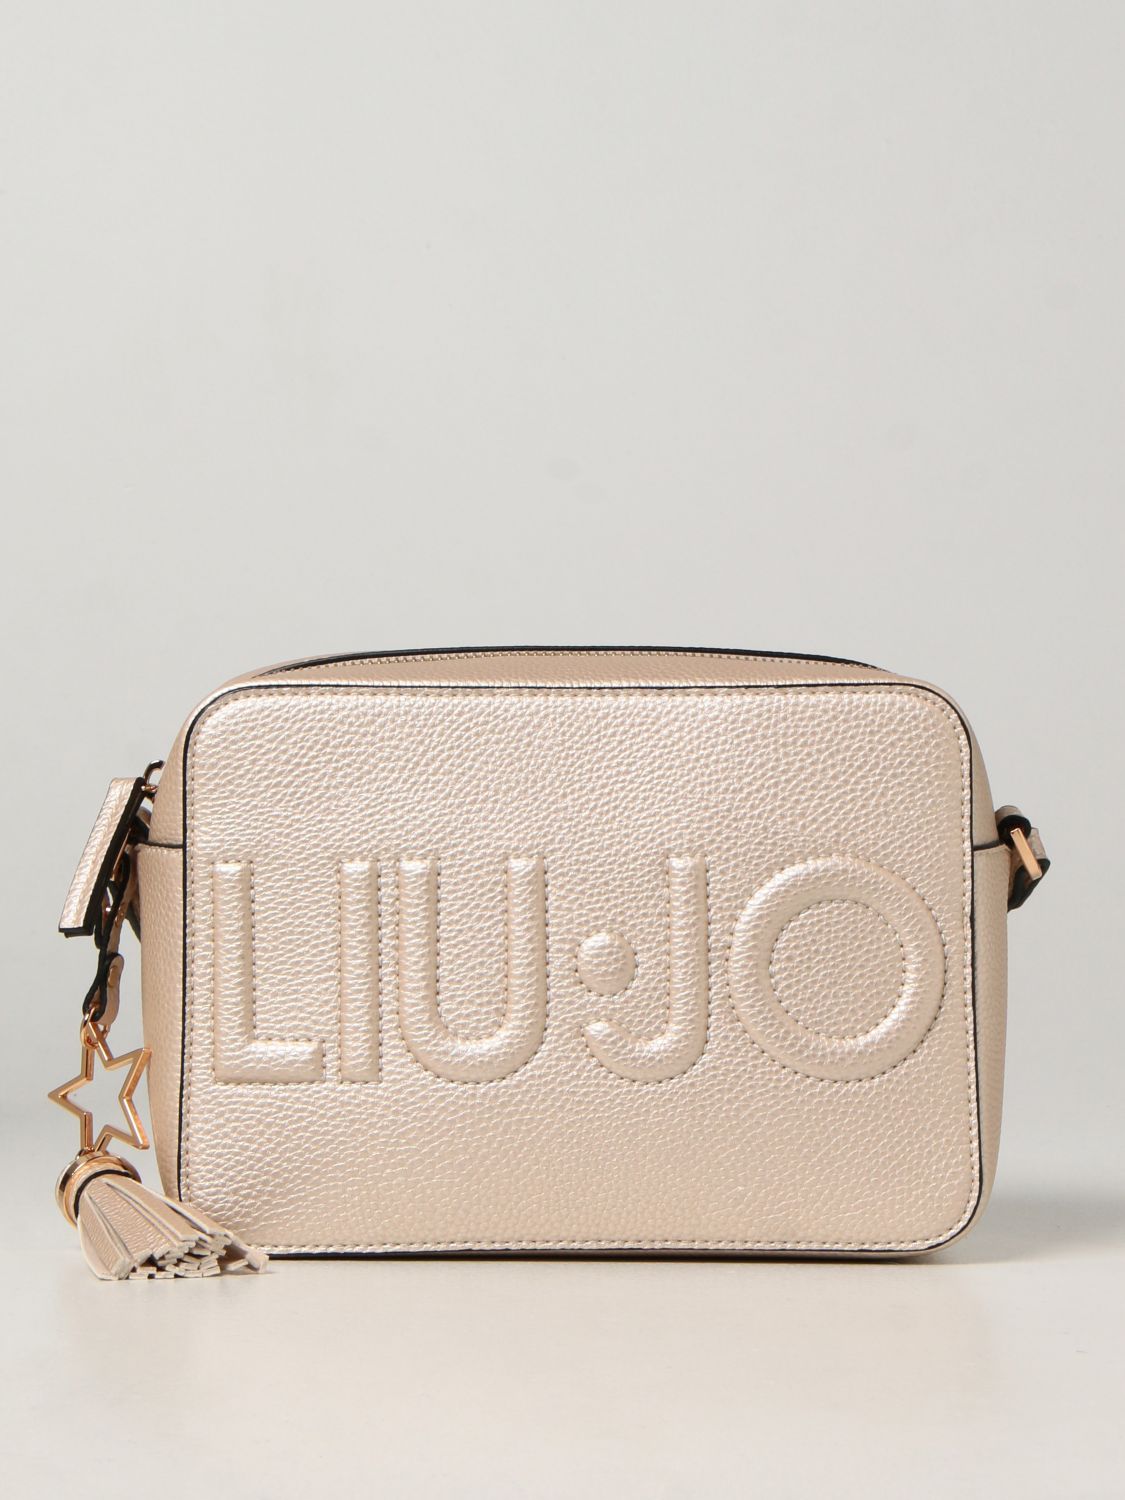 Liu Jo Bag In Textured Synthetic Leather Gold Liu Jo Crossbody Bags Nf1267e0086 Online At 8864